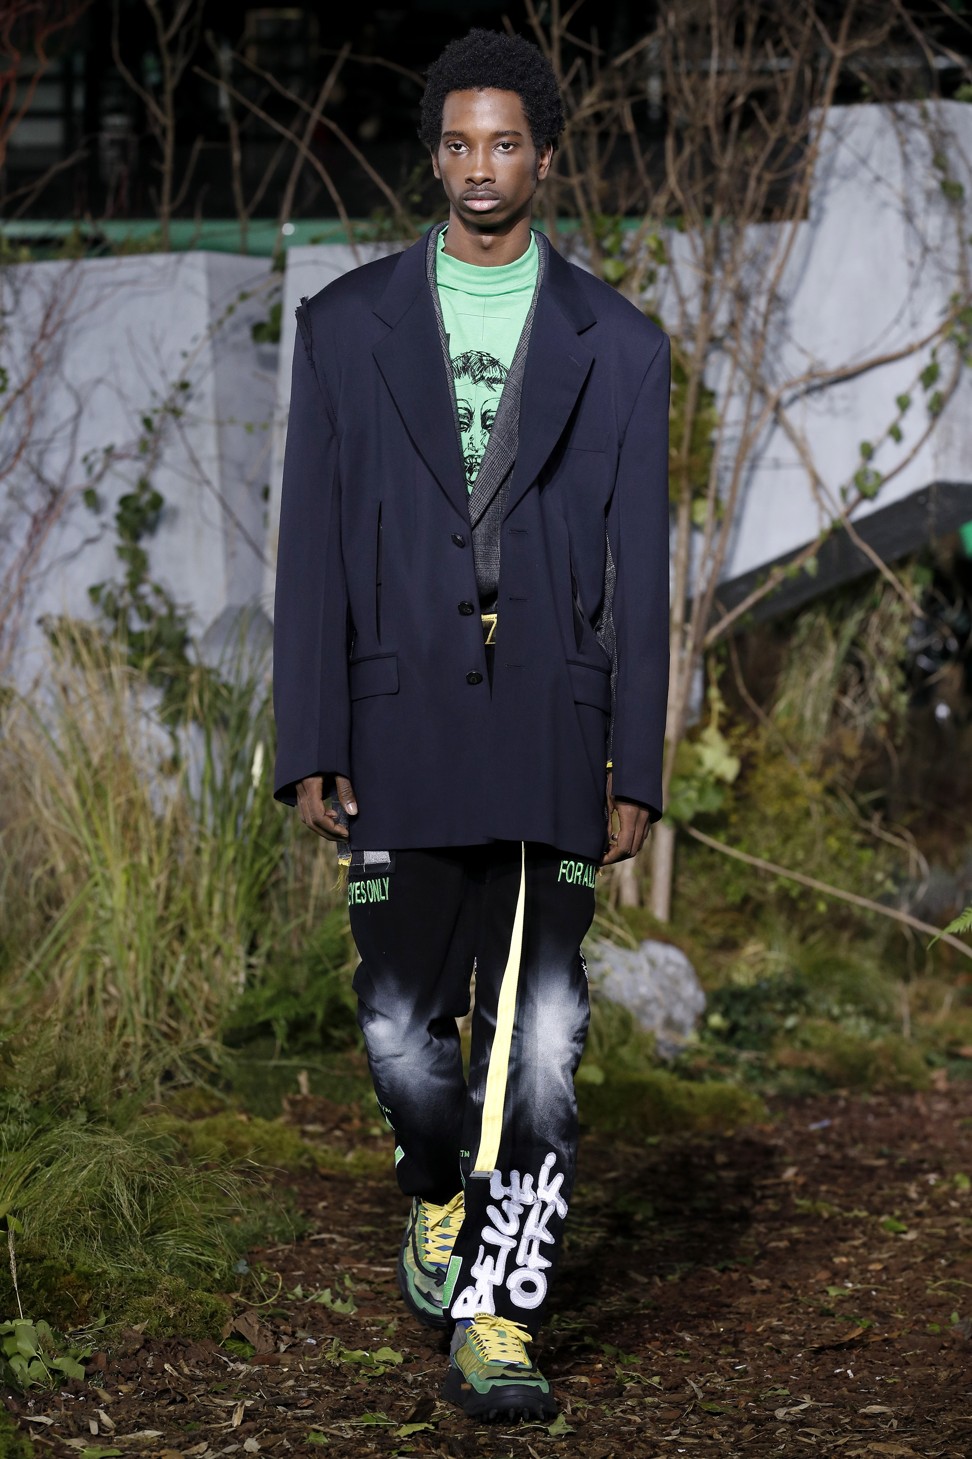 OFF-WHITE C/O VIRGIL ABLOH FALL WINTER 2020 MEN'S COLLECTION